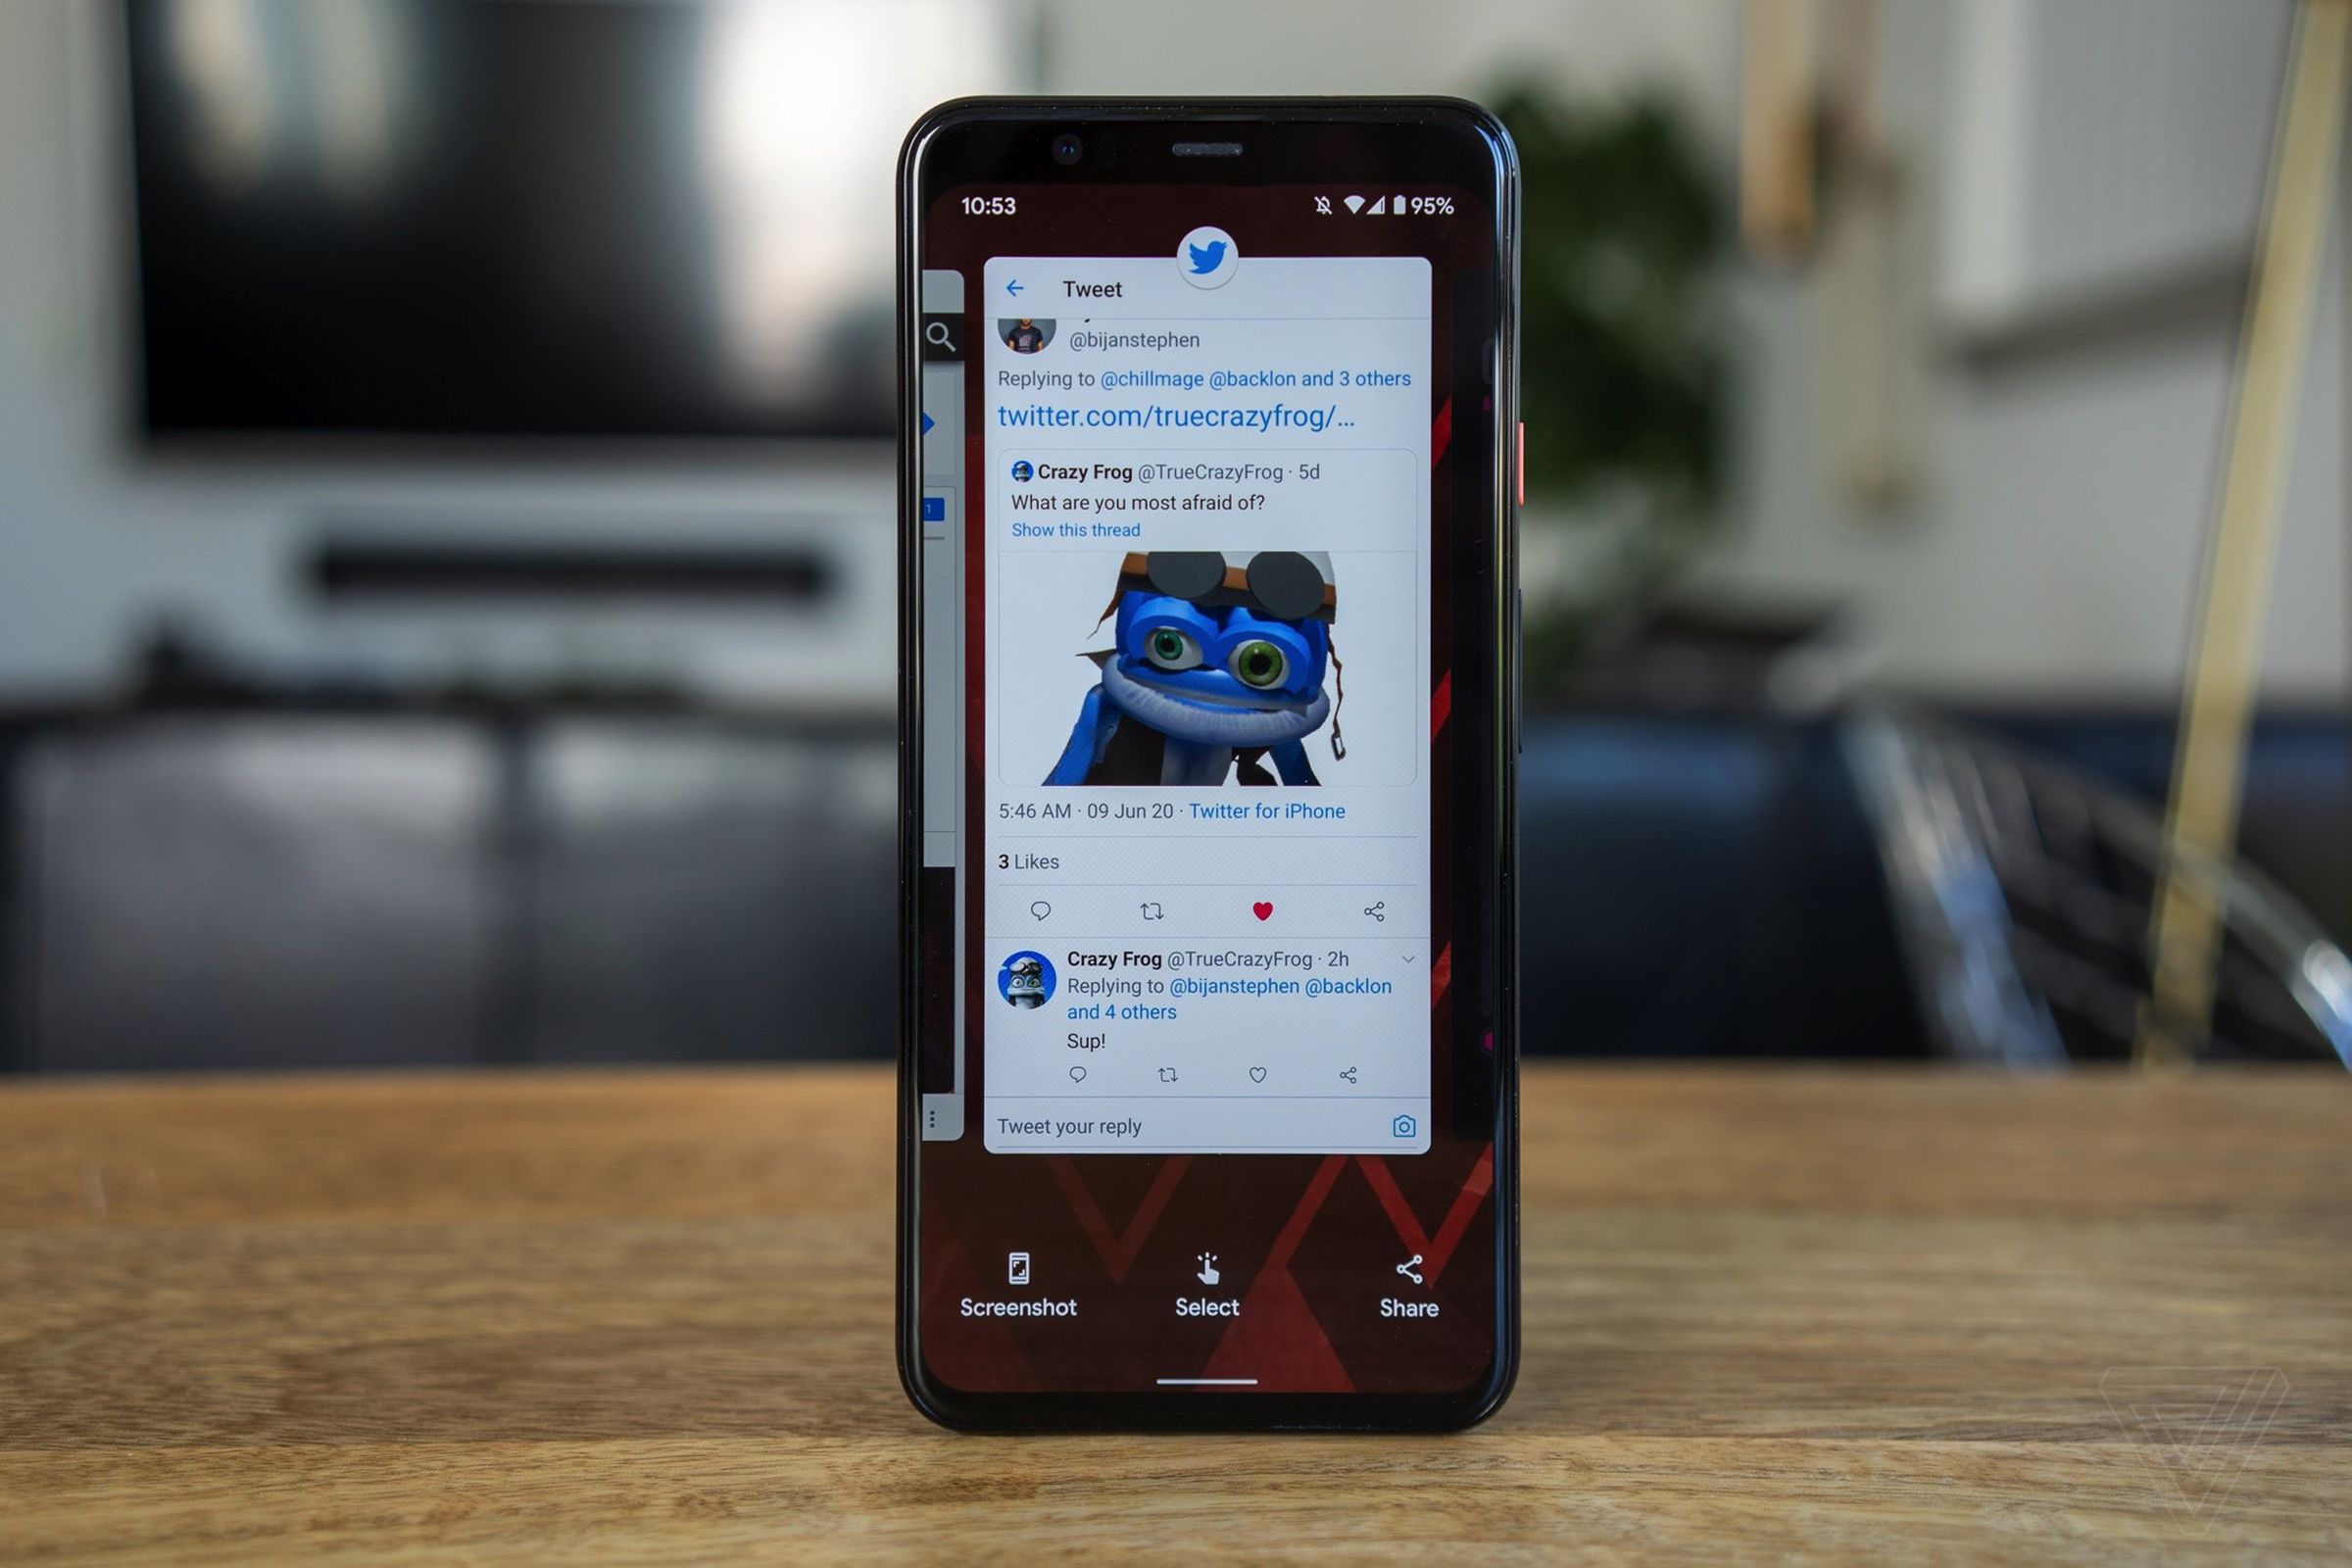 Android 11’s “recents” screen shows you how to directly select text to copy.